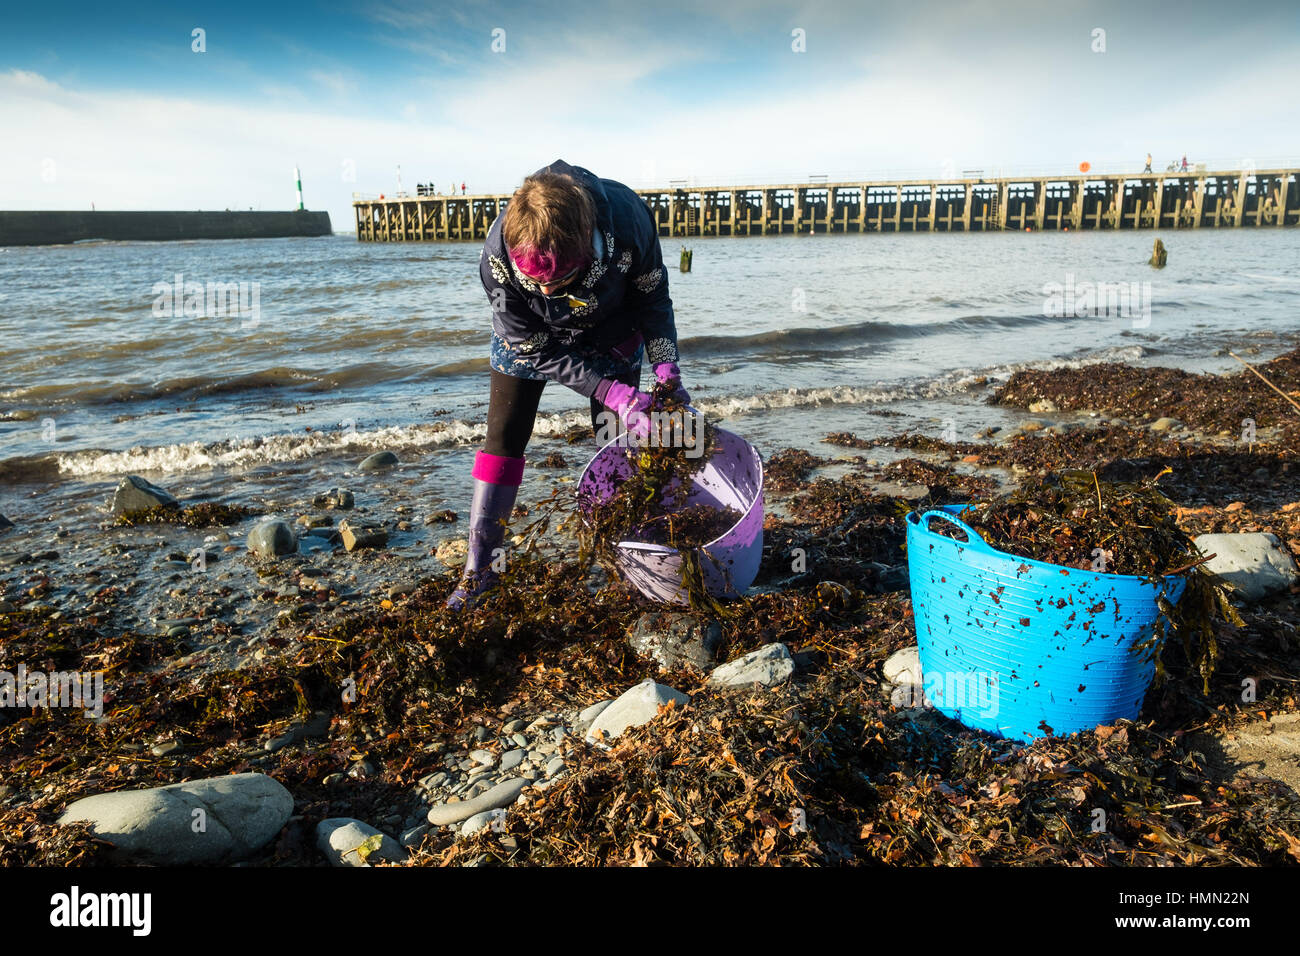 Aberystwyth Wales UK, Saturday 04 February 2017  After two days of stormy seas and huge waves, a woman gardener gathers the fronds of seaweed washed up by the gales on the beach at Aberystwyth to use as an organic fertilizer and mulch on her allotment garden.   Seaweed has been used as a soil improver for centuries, particularly in coastal areas , and is a useful substitute for farmyard manure.   Seaweed contains several useful plant nutrients, including nitrogen, potassium, phosphate and magnesium   photo ©Keith Morris / Alamy Live News Stock Photo